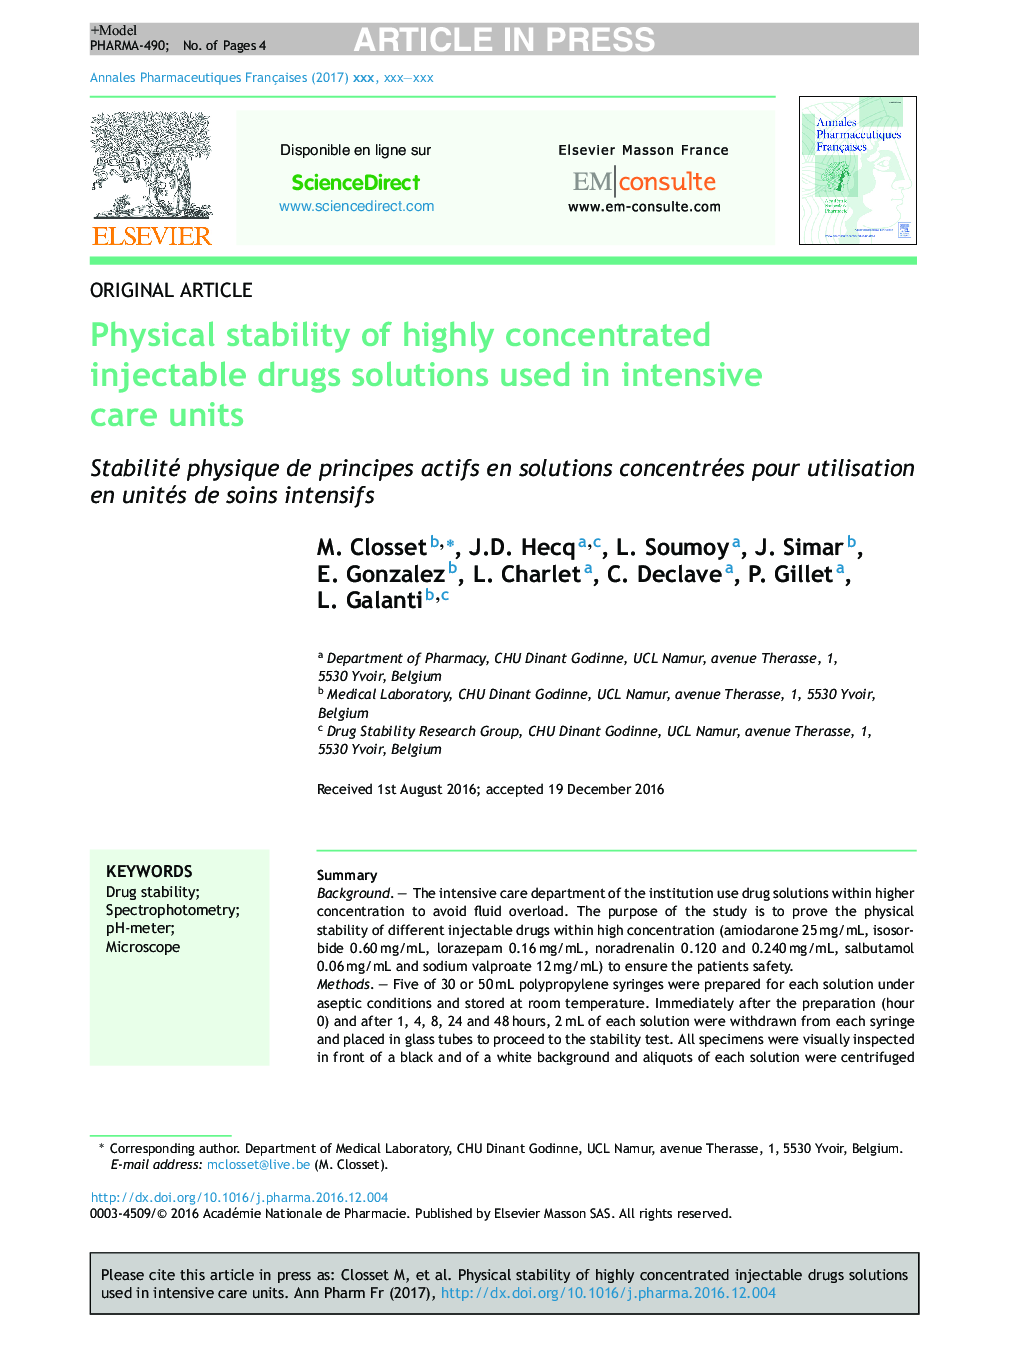 Physical stability of highly concentrated injectable drugs solutions used in intensive care units